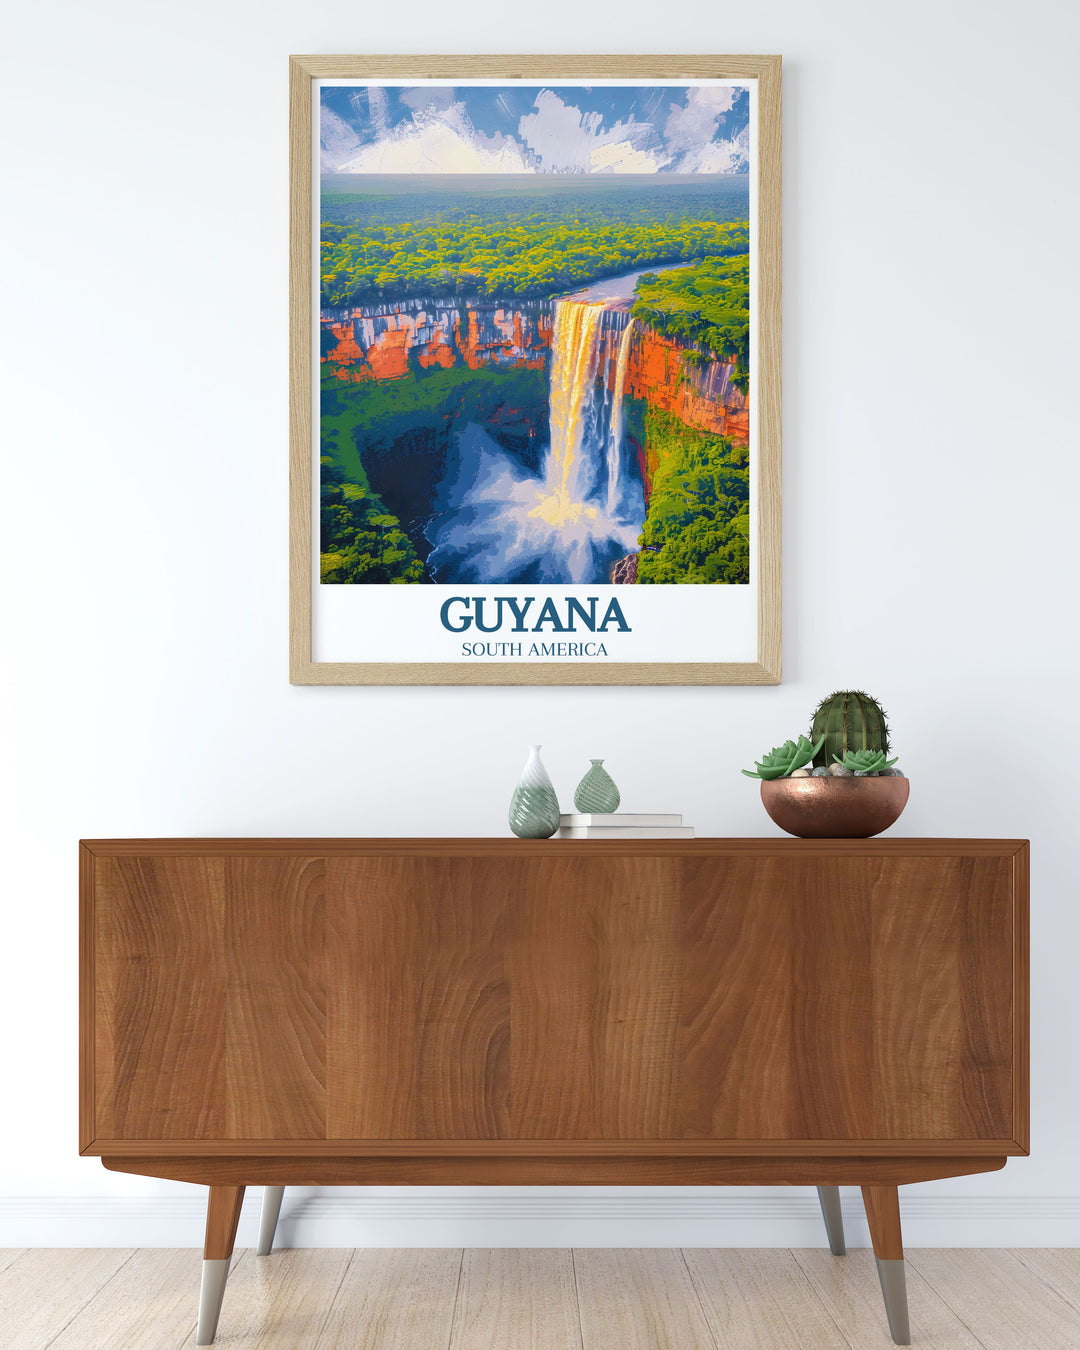 An intricate depiction of Kaieteur Falls and the surrounding rainforest, this art print showcases the stunning natural scenery of Guyana, bringing the beauty of the Amazon basin into your living space.